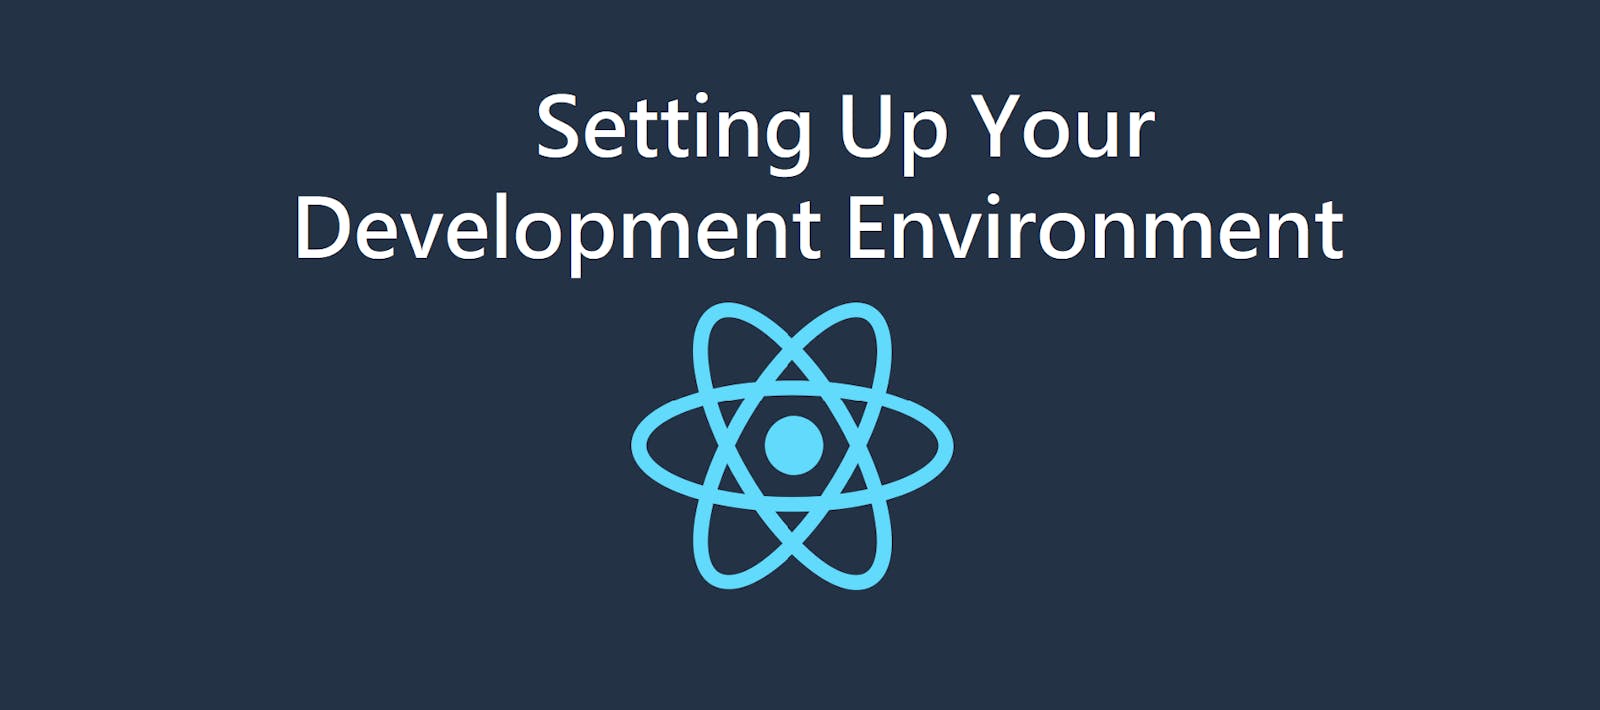 Day 2: Setting Up Your Development Environment